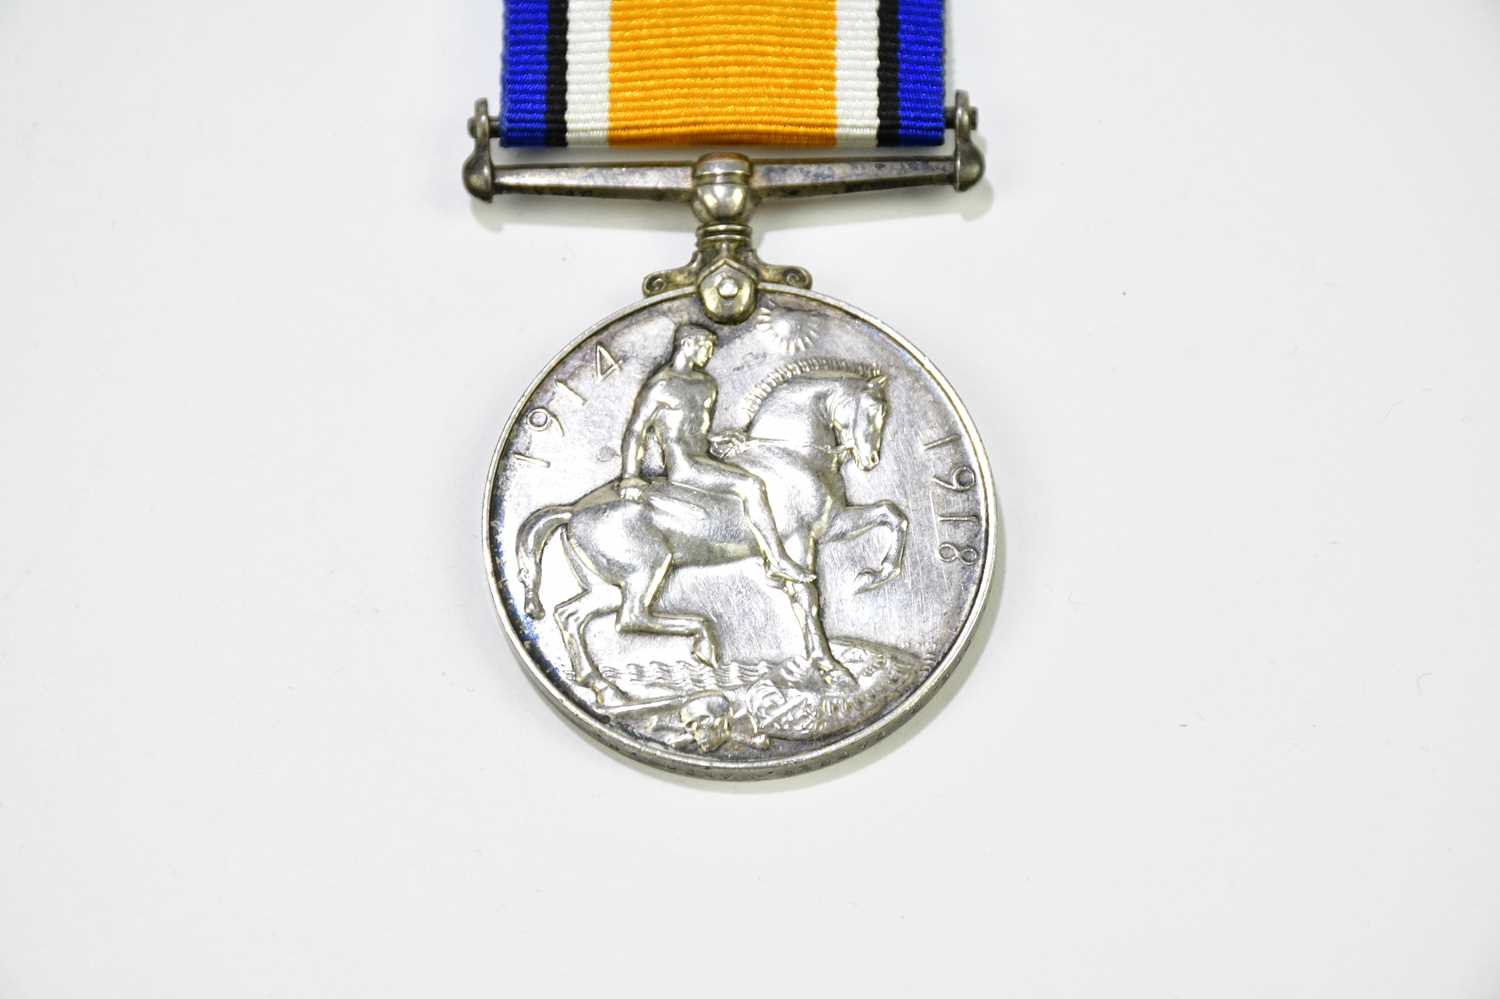 WWI War and Victory Medals, possibly awarded to brothers, the War Medal named to Pte G. Capper - Image 6 of 11